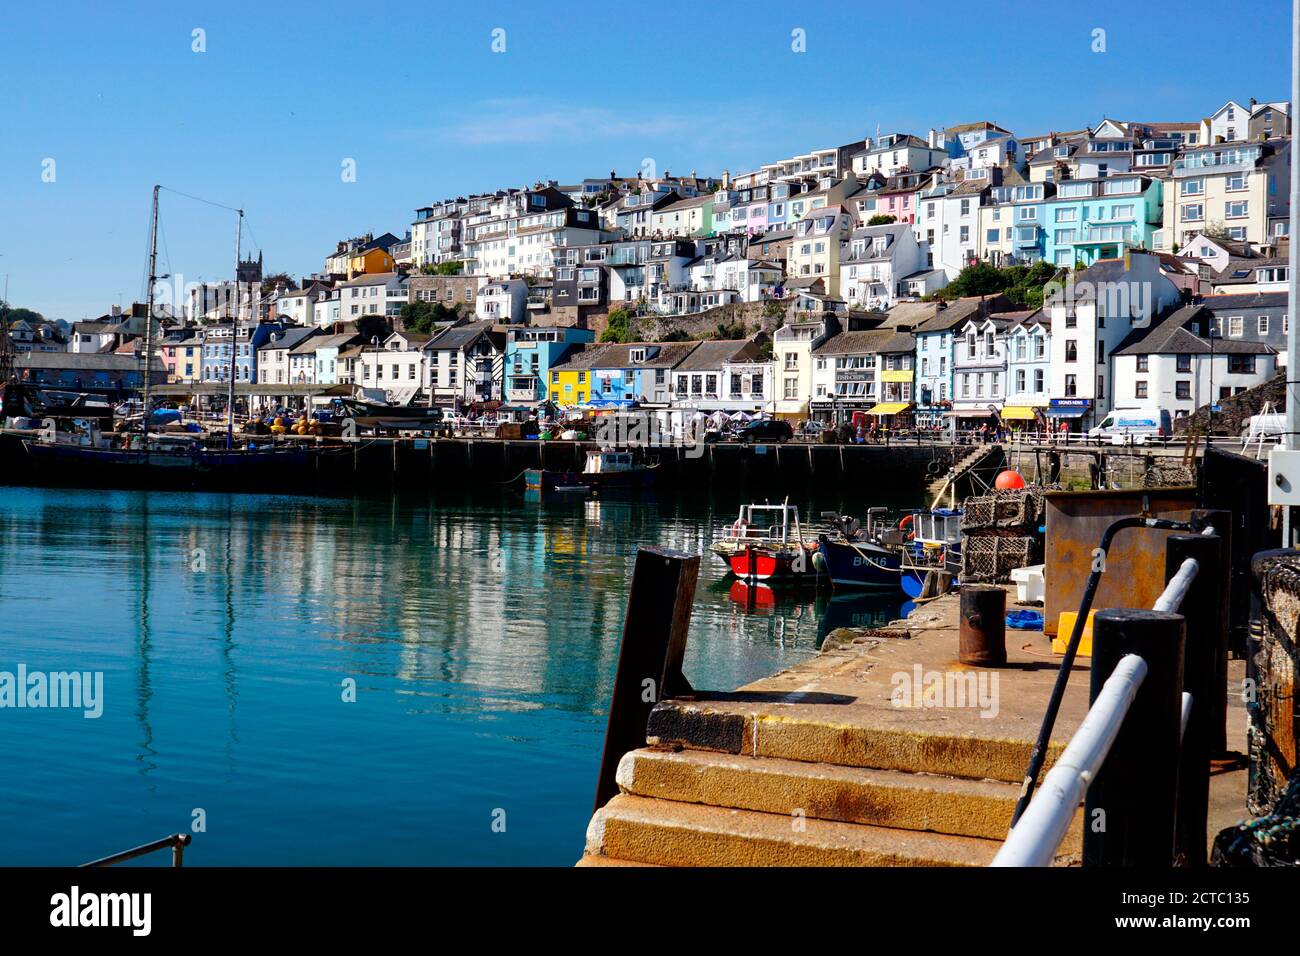 Brixham, Devon, UK. September 14, 2020.    Beautiful various tiered architecture reflecting in the harbour at Brixham in Devon, UK. Stock Photo